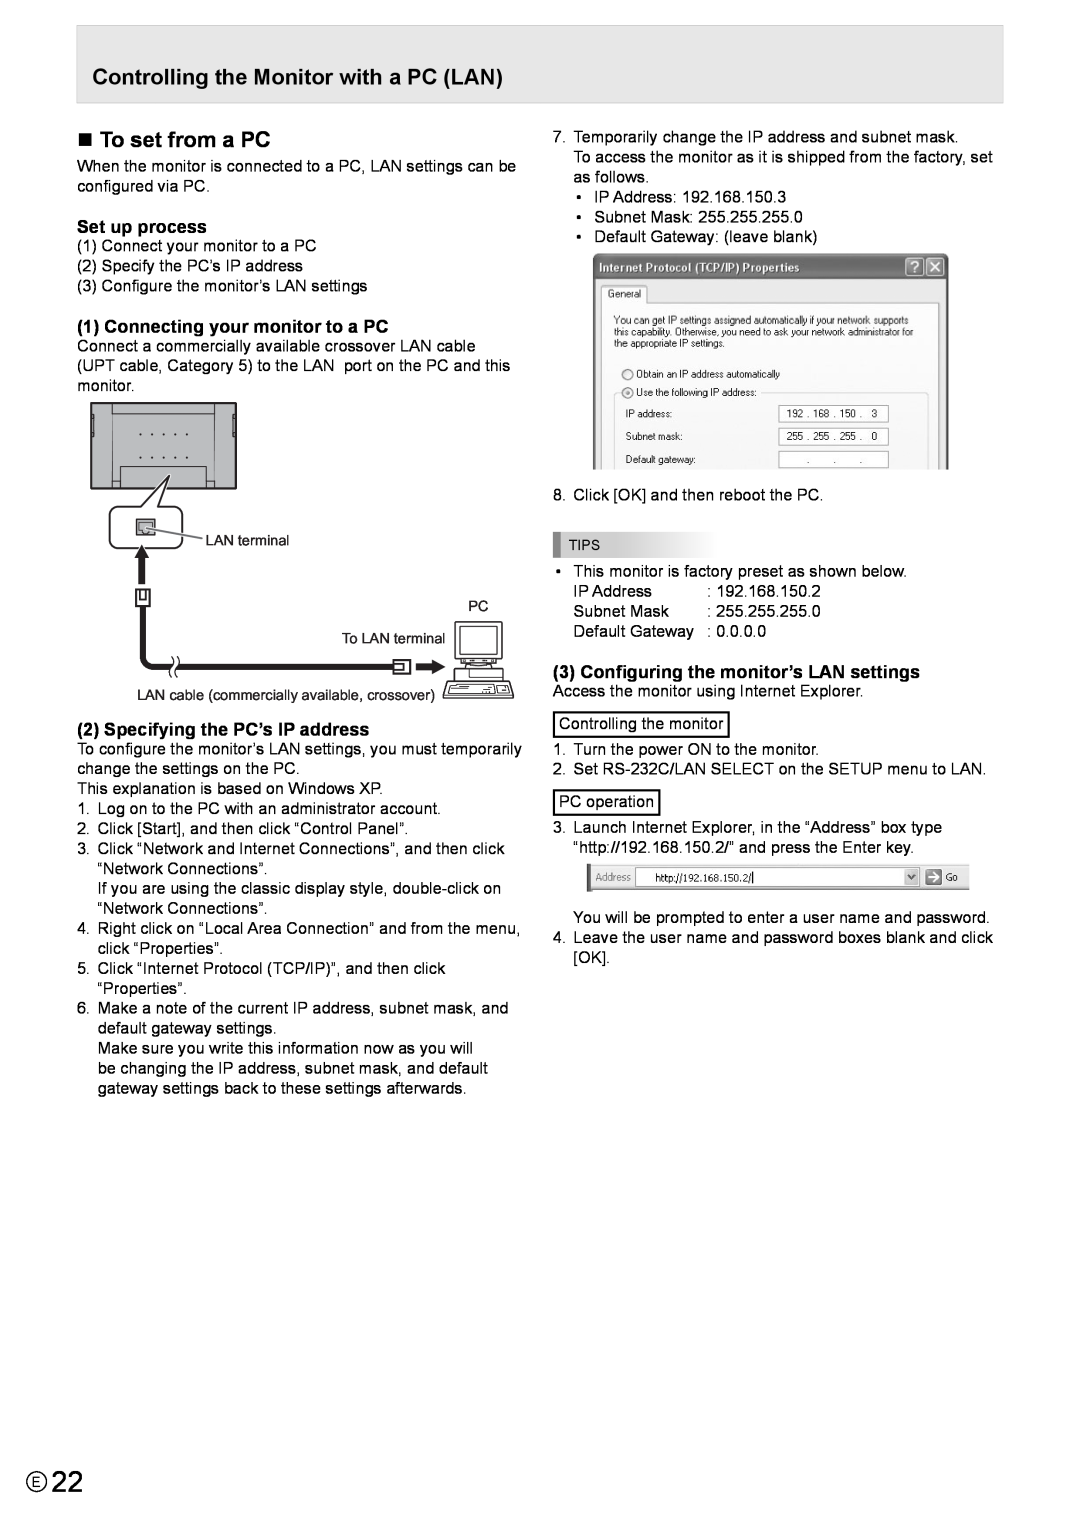 Mitsubishi Electronics MT819, LDT521V manual Controlling the Monitor with a PC LAN „ To set from a PC, Set up process 